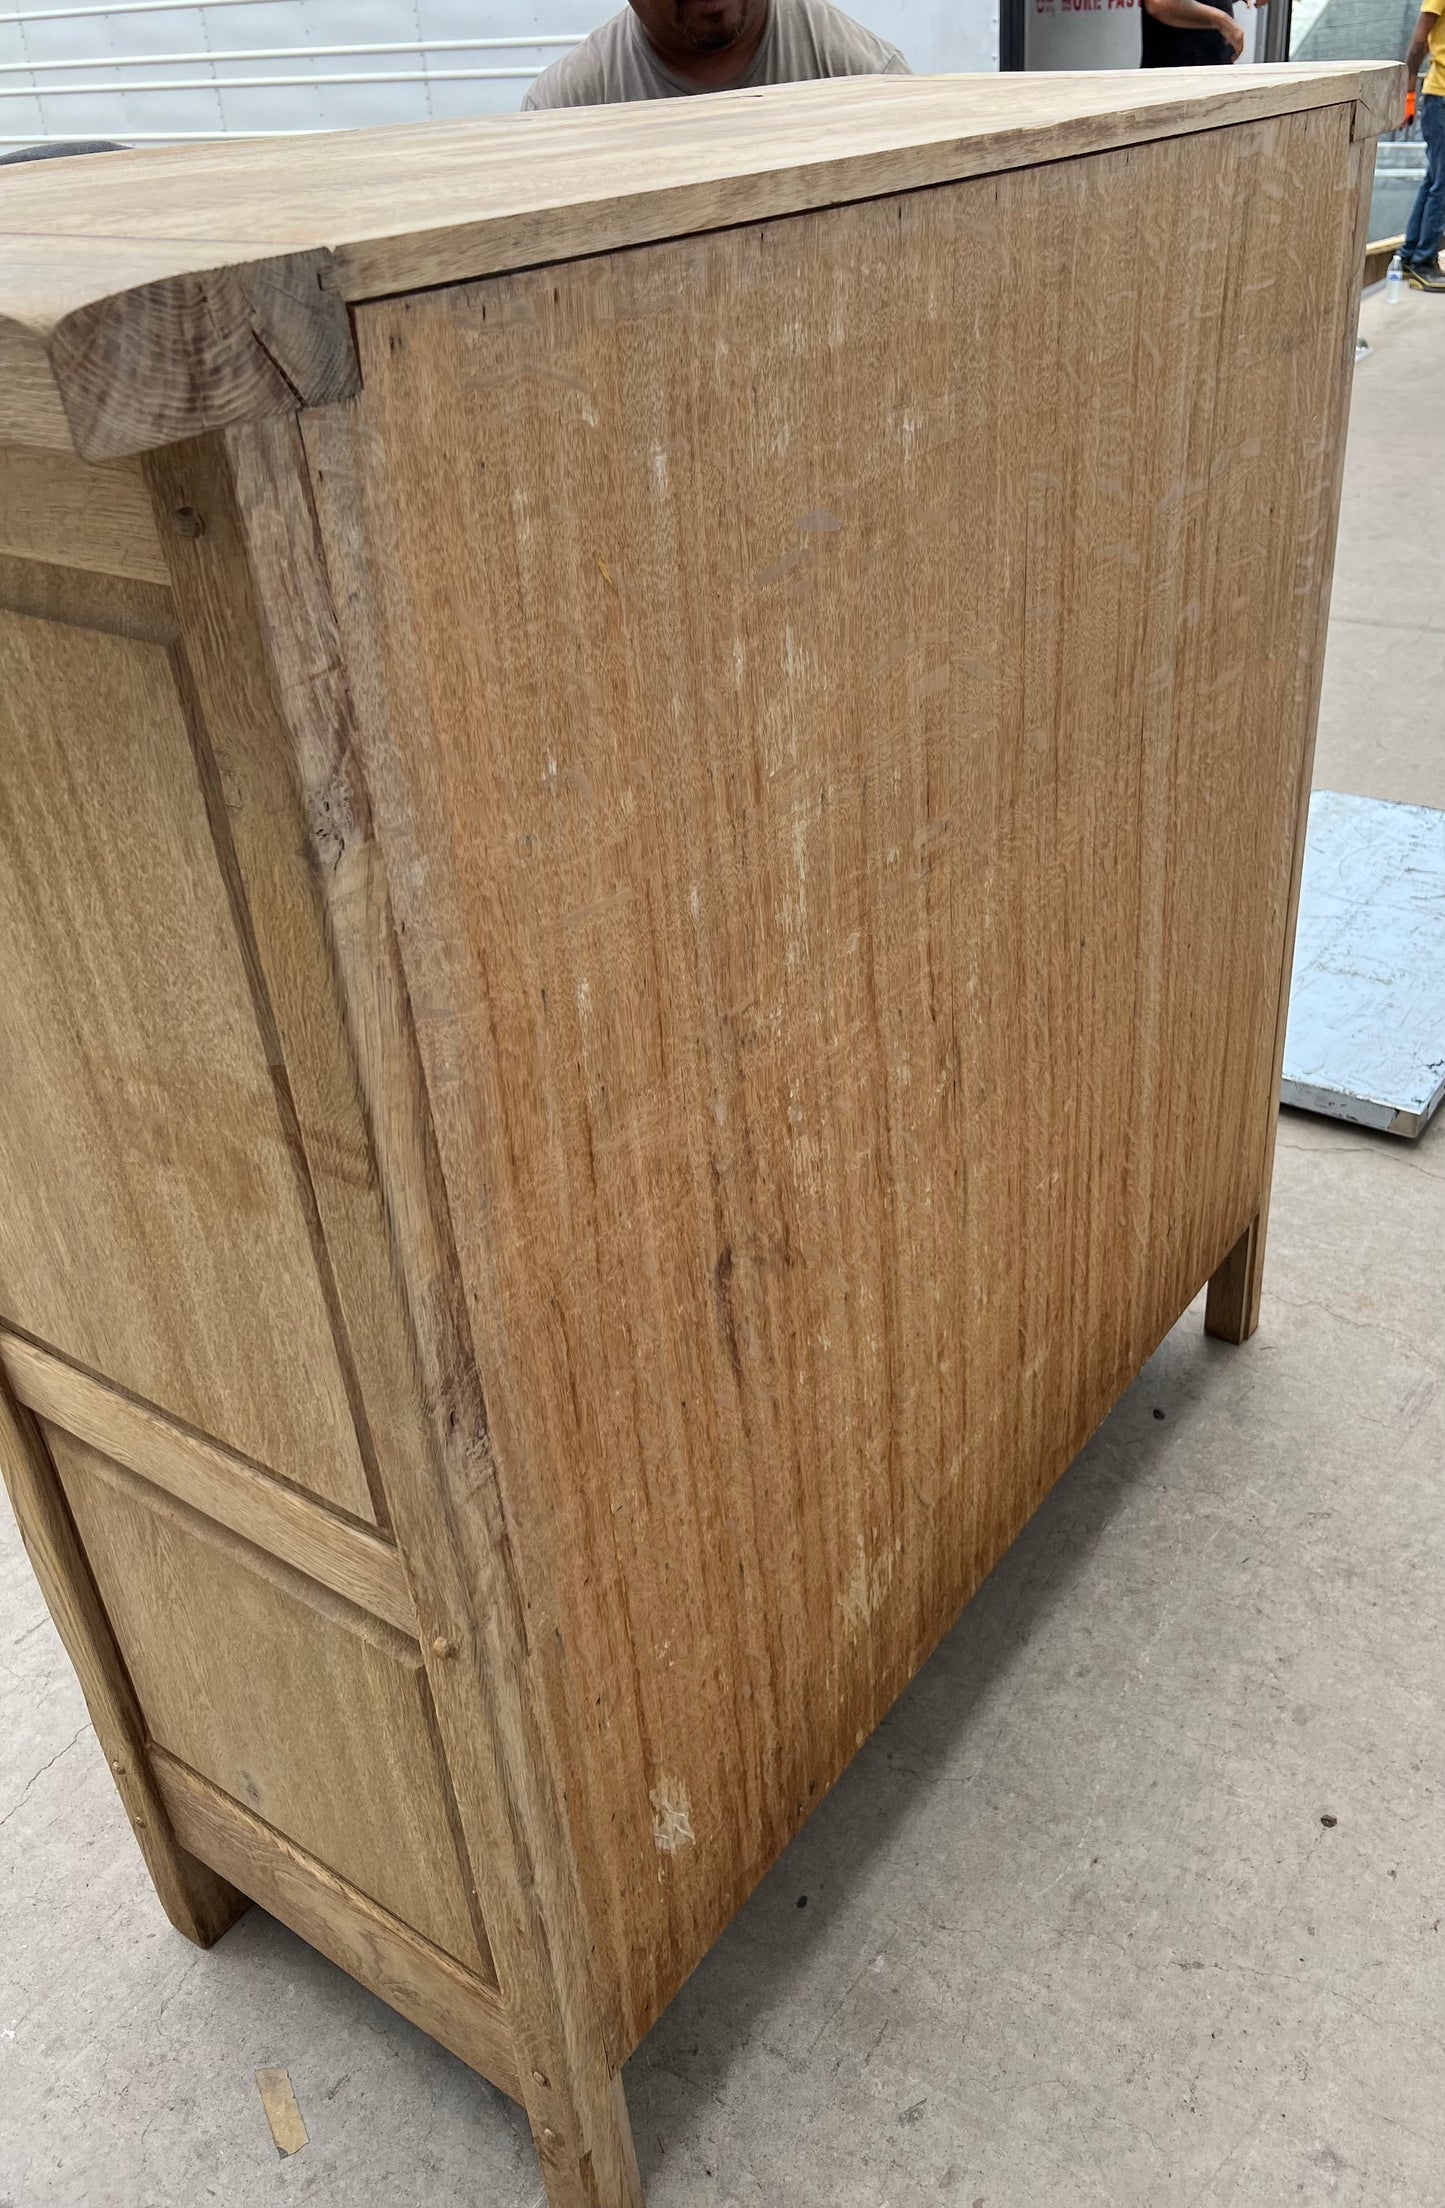 Bleached Antique Cabinet w/2 Drawers